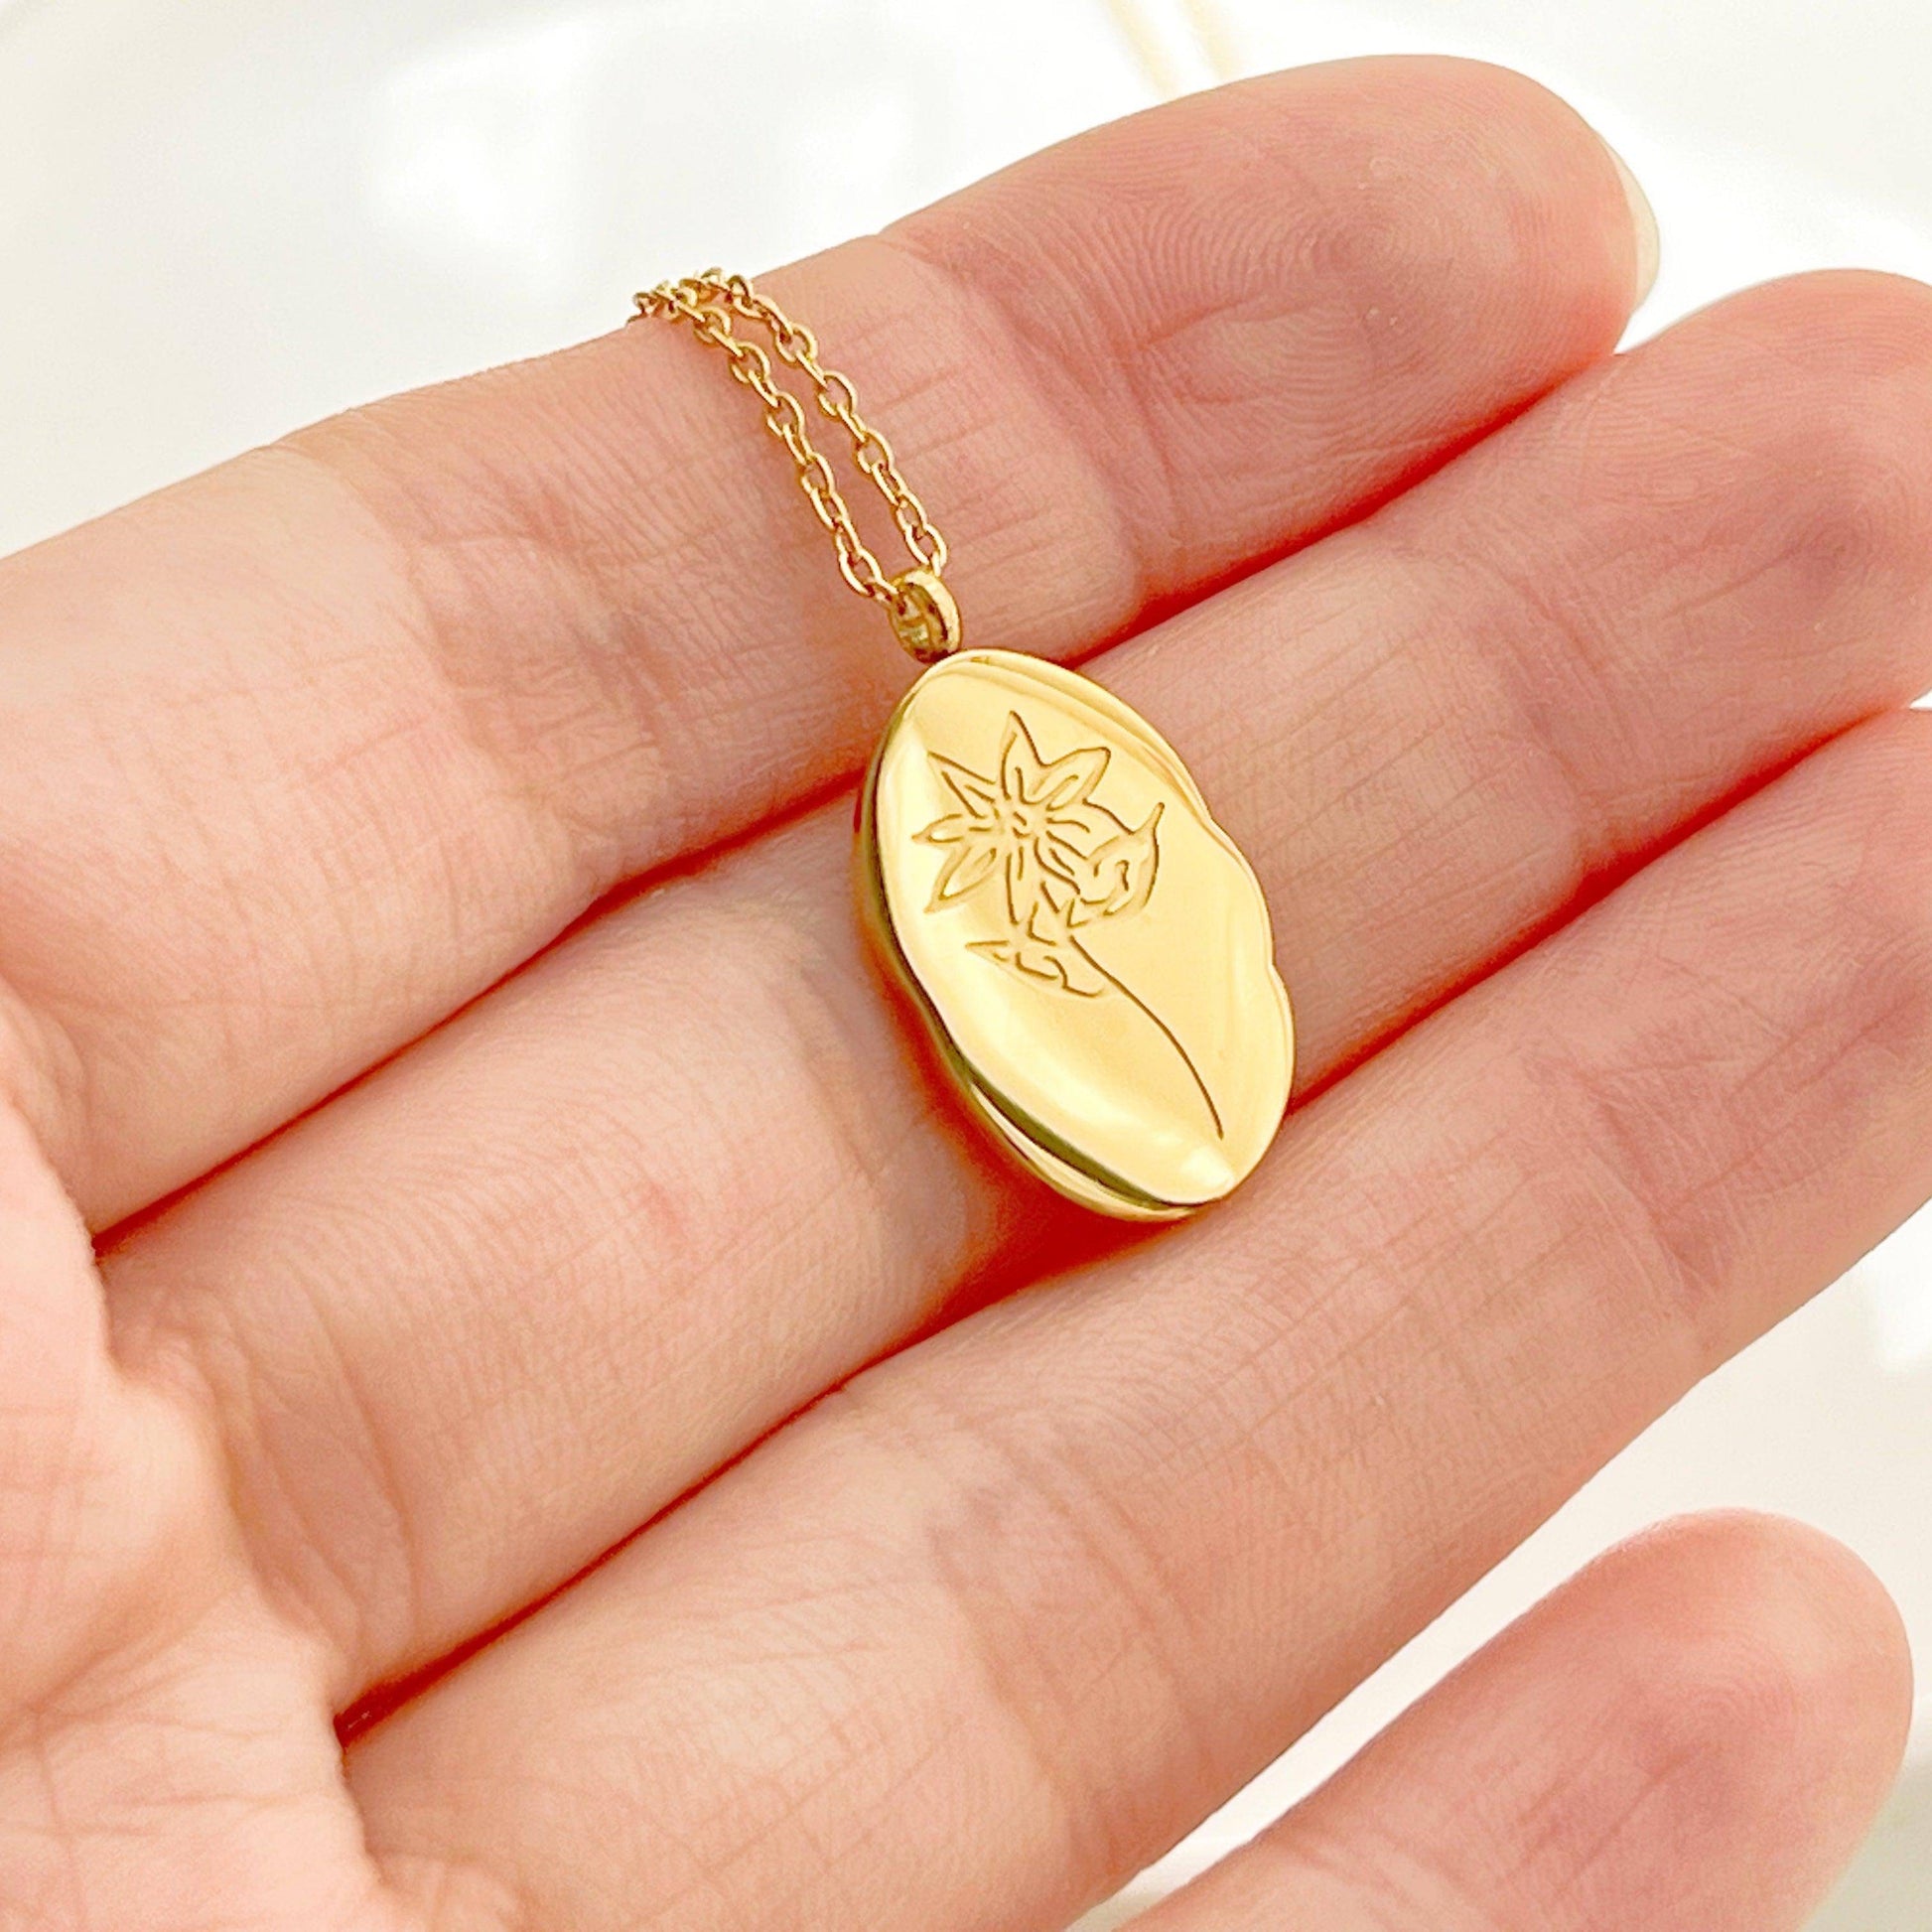 Lily Pendant Necklace - May Birth Flower Gold Plated Stainless Steel Necklace-Ninaouity